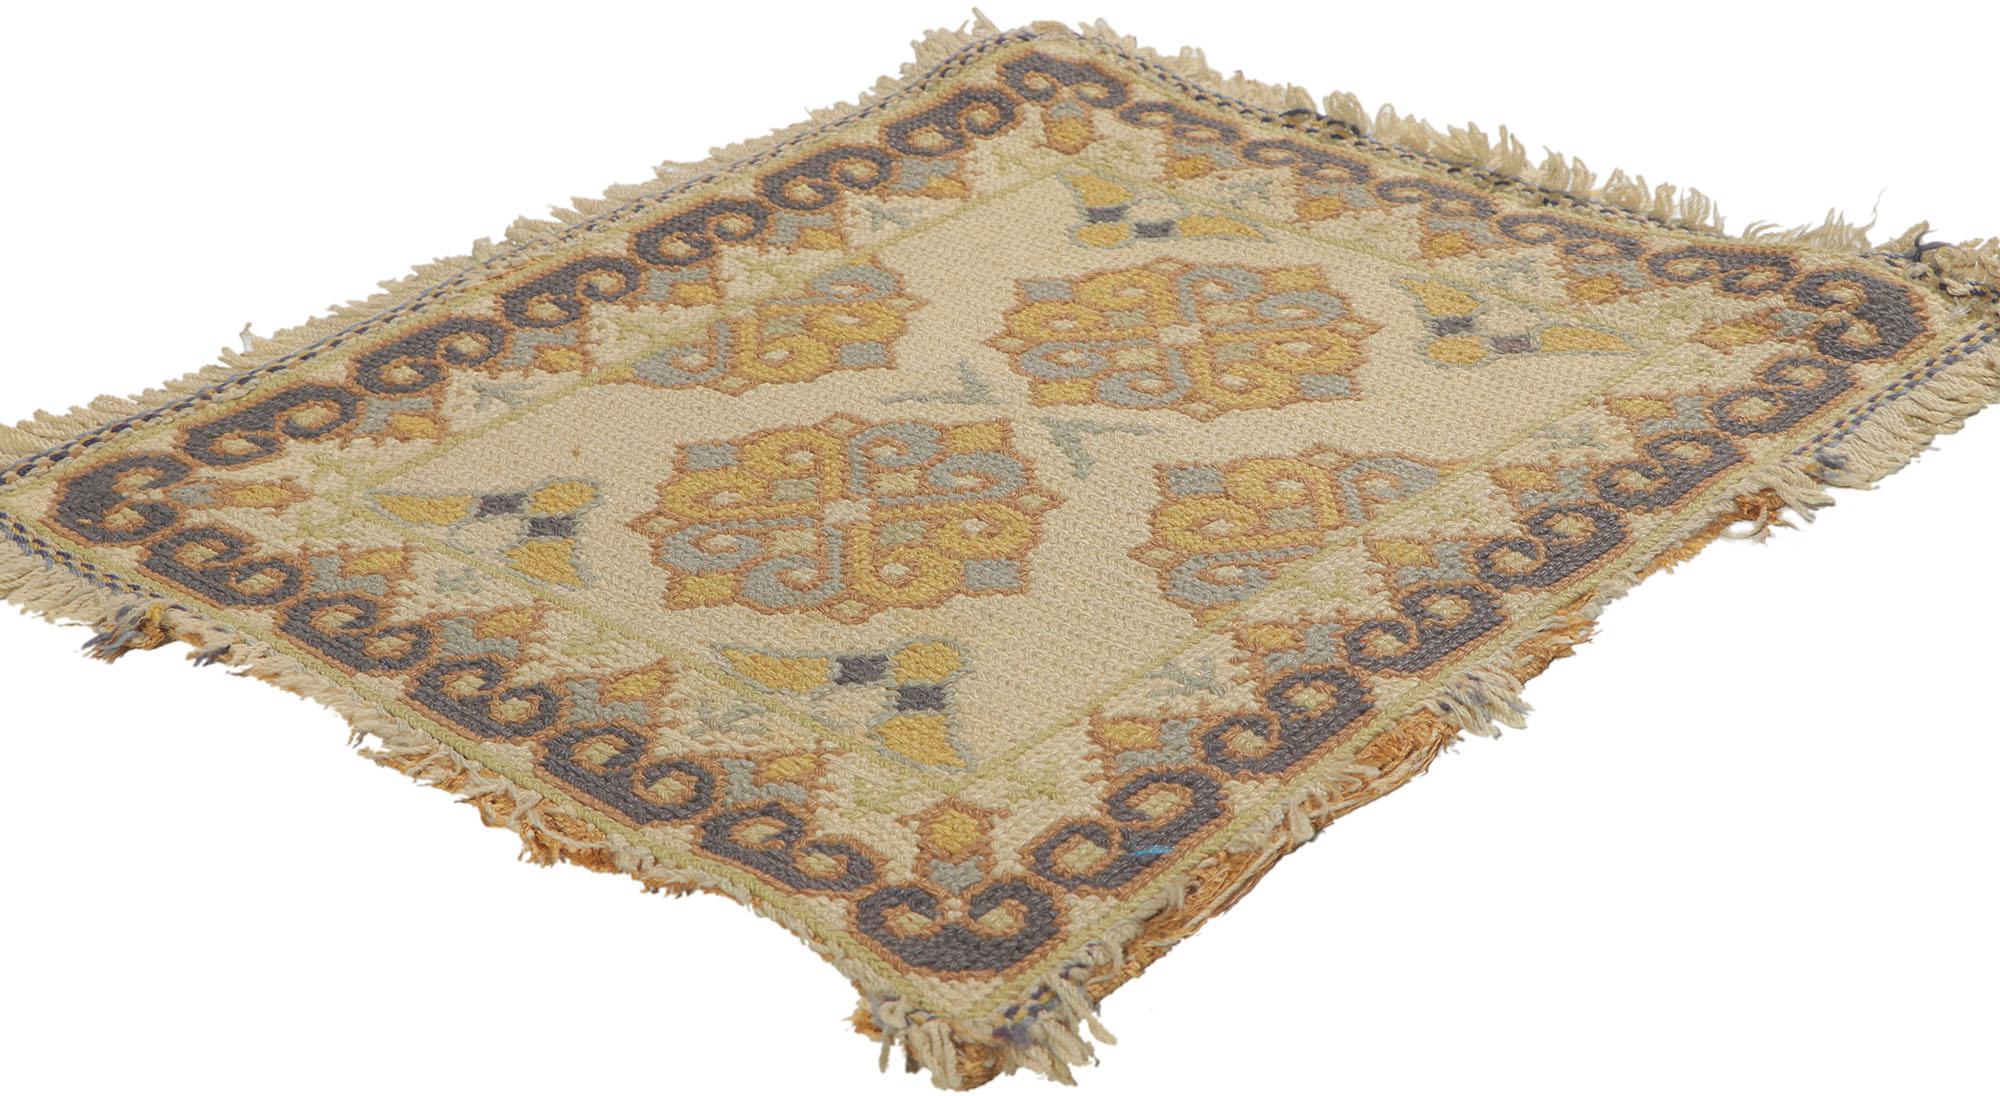 73318 Antique Portuguese Needlepoint Arraiolos Rug, 01'09 x 02'00. Arraiolos rugs are traditional Portuguese handcrafted wool embroideries from Arraiolos, featuring intricate designs like symmetrical patterns, floral motifs, and historical scenes,